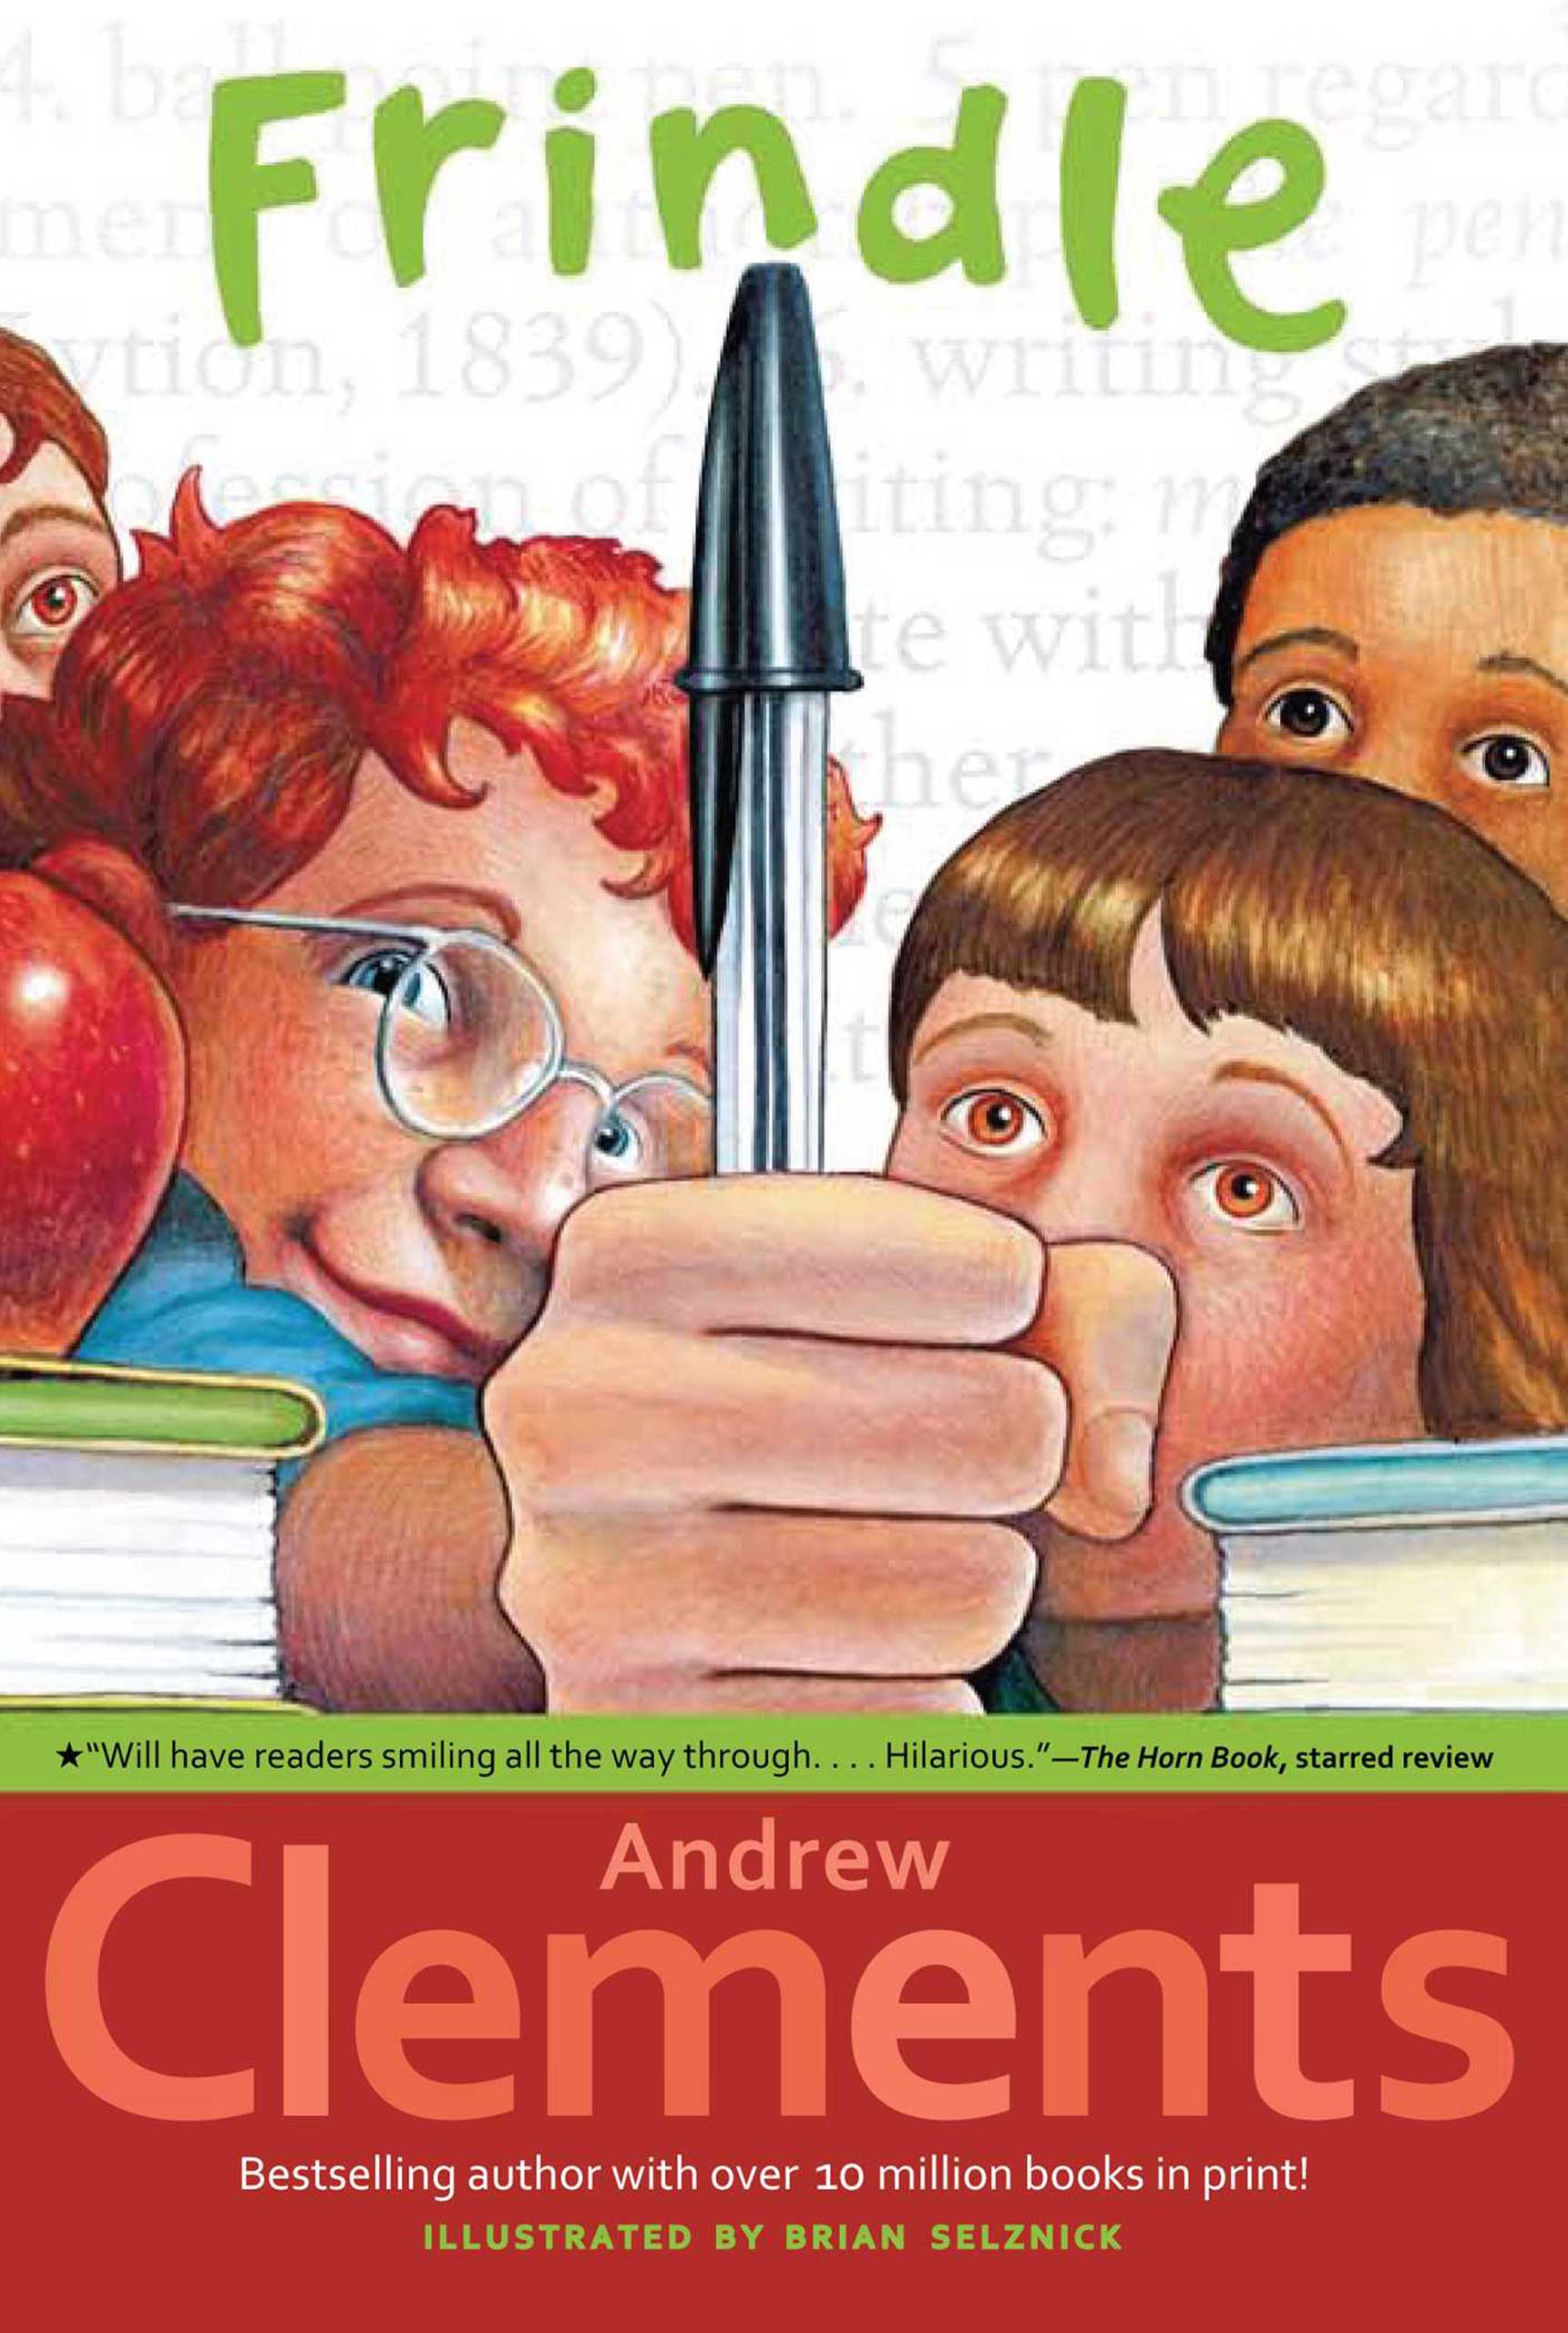 Frindle, by Andrew Clements.
                              
                              
                              
                              Fifth-grade prankster Nicholas Allen invents a new word for a pen to defy language teacher Mrs. Granger. But the word, “frindle,” quickly gains traction and spreads beyond Allen’s control.
                              
                              
                              
                              Buy now: Frindle